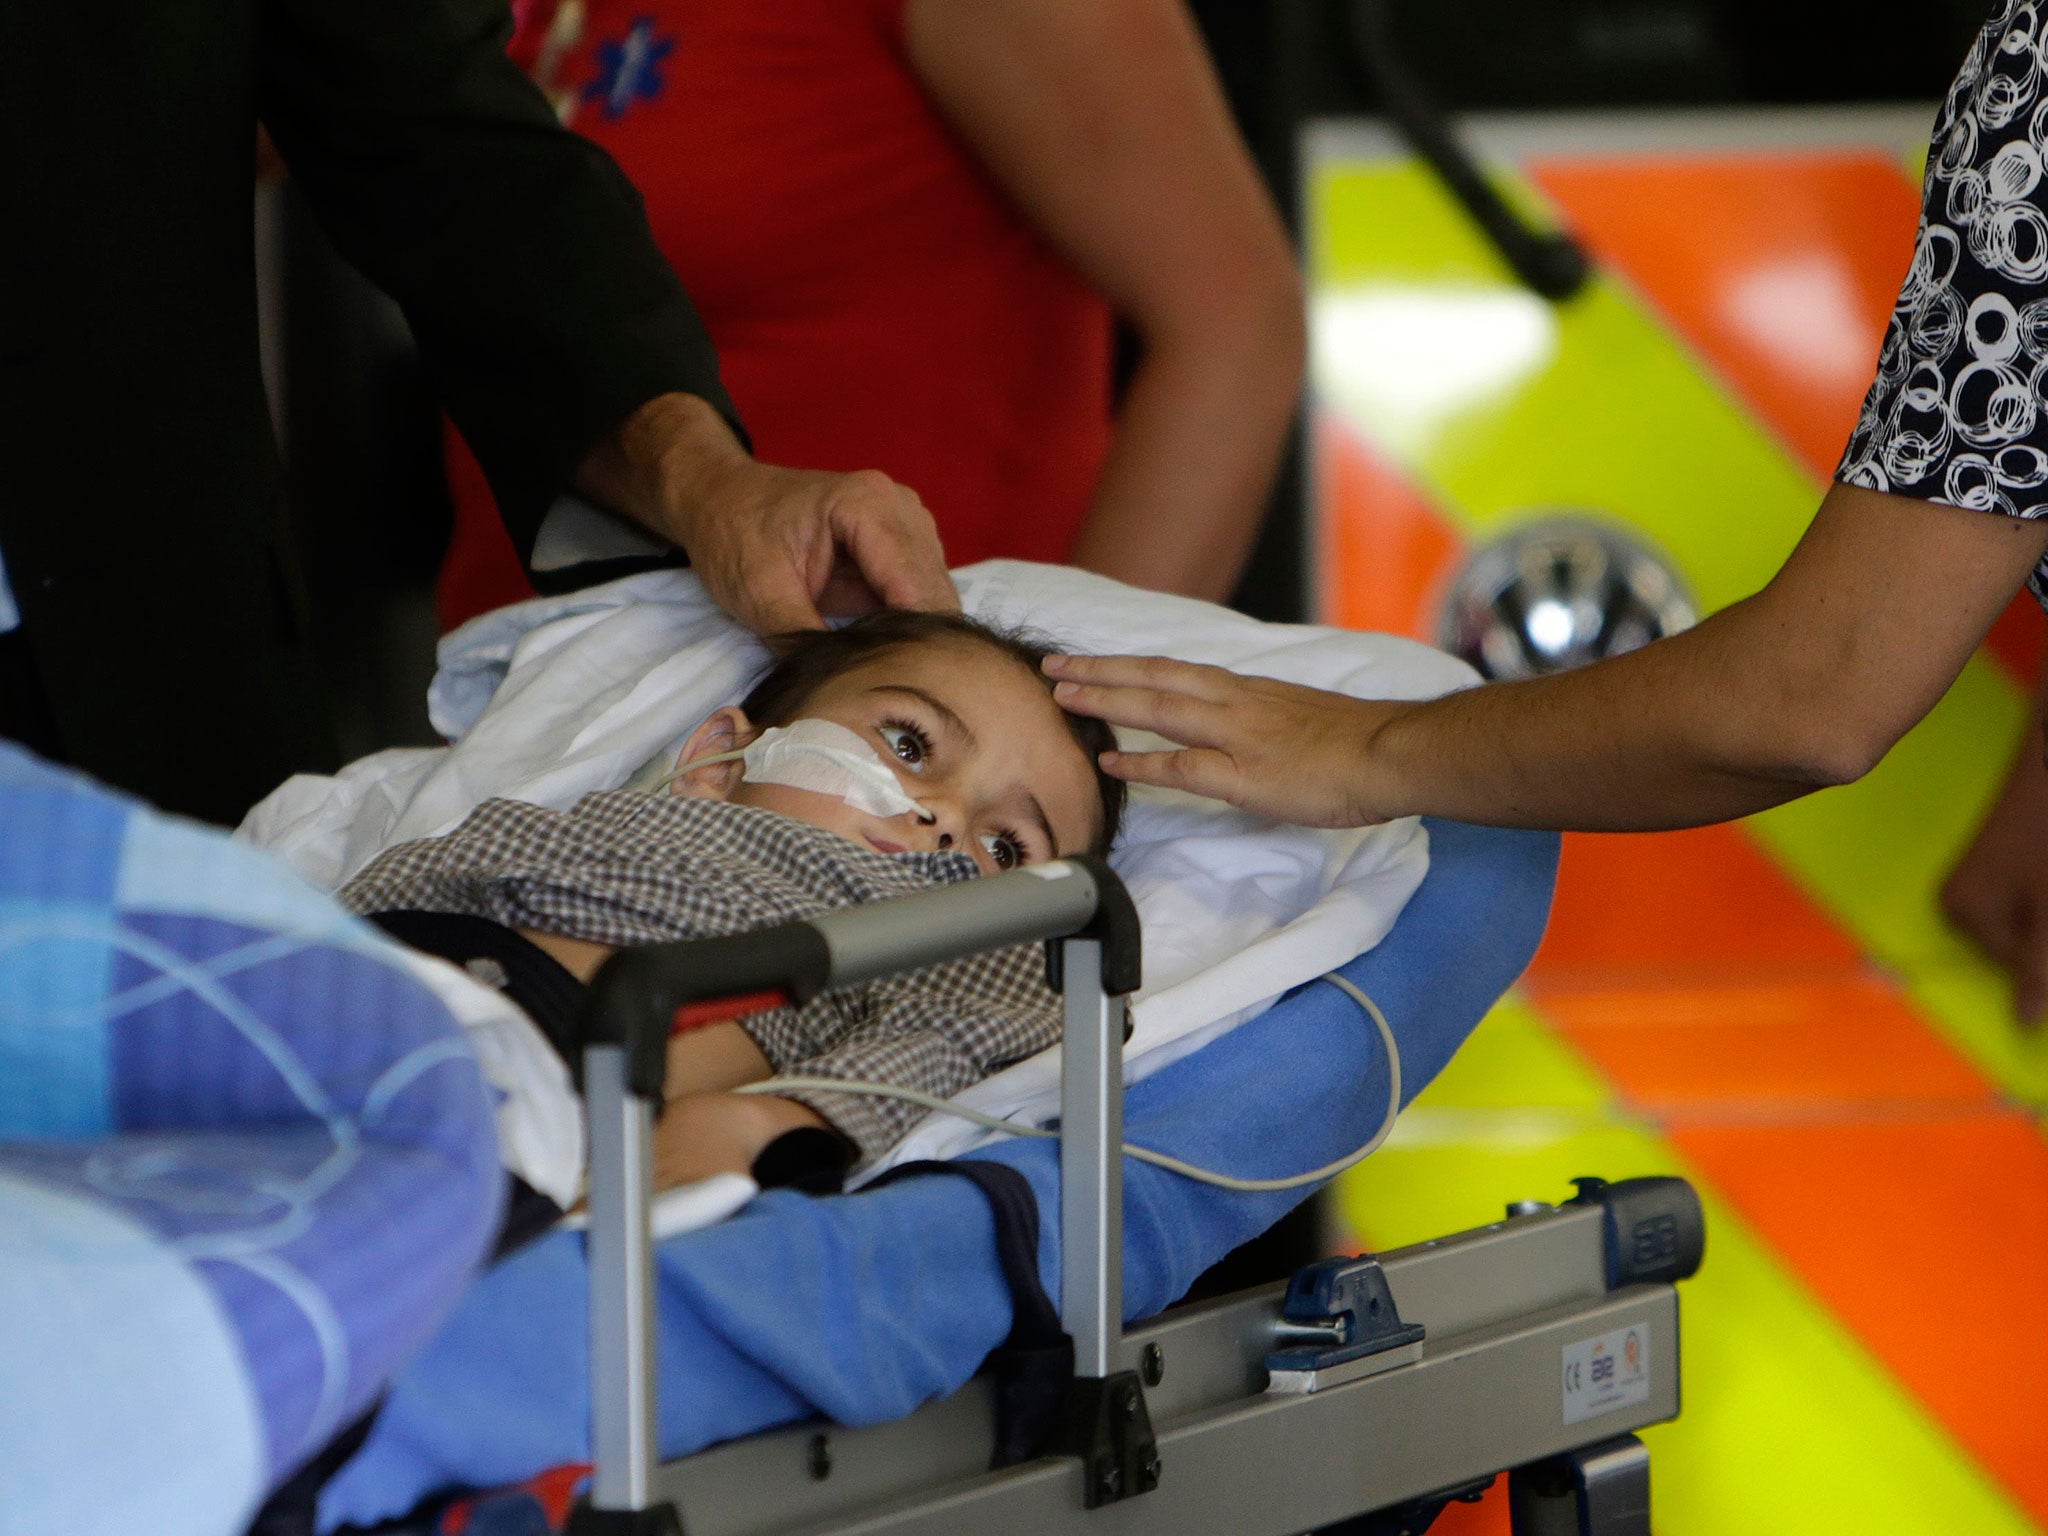 Ashya King, a 5-year-old British boy with a brain tumour, lies on a stretcher as he arrives with his parents at Motol Hospital in Prague